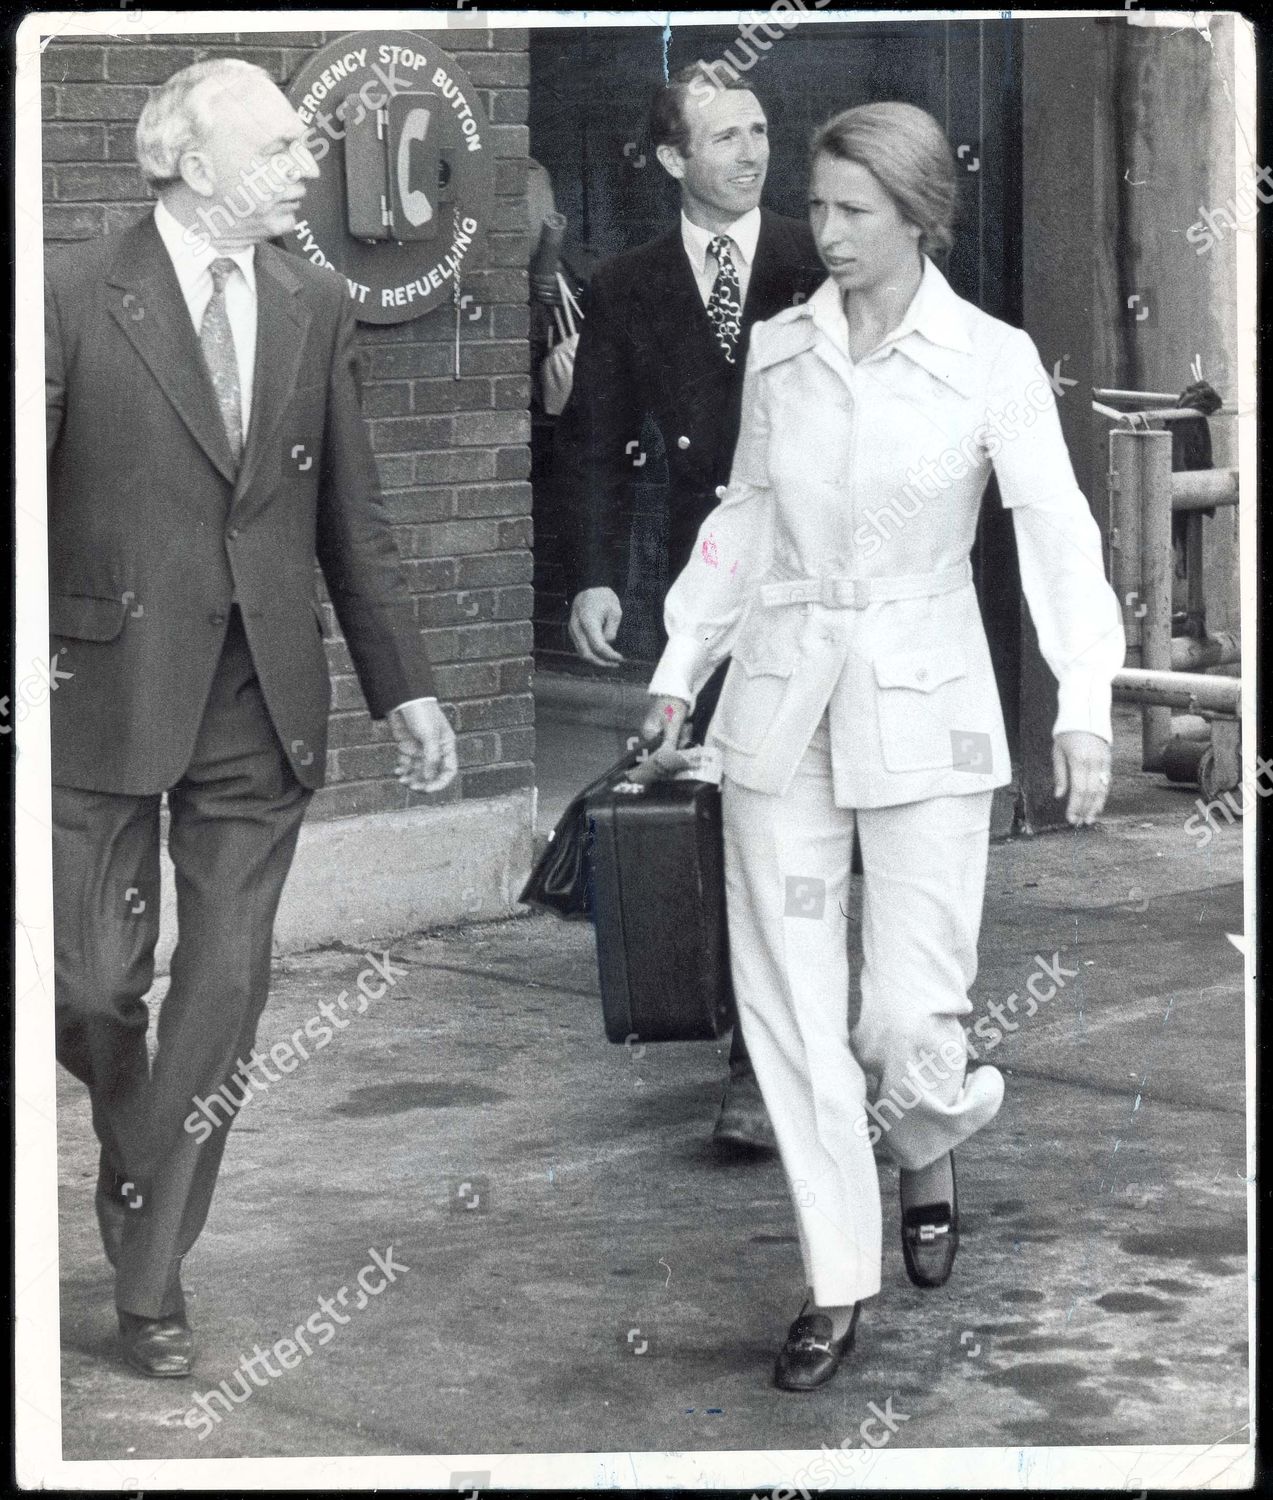 princess-anne-now-princess-royal-july-1975-princess-anne-sported-a-safari-suit-when-she-flew-into-heathrow-aboard-a-british-airways-flight-from-boston-today-she-has-been-in-america-for-a-week-with-captain-mark-phillips-taking-part-in-the-ledyard-f-shutterstock-editorial-891733a.jpg